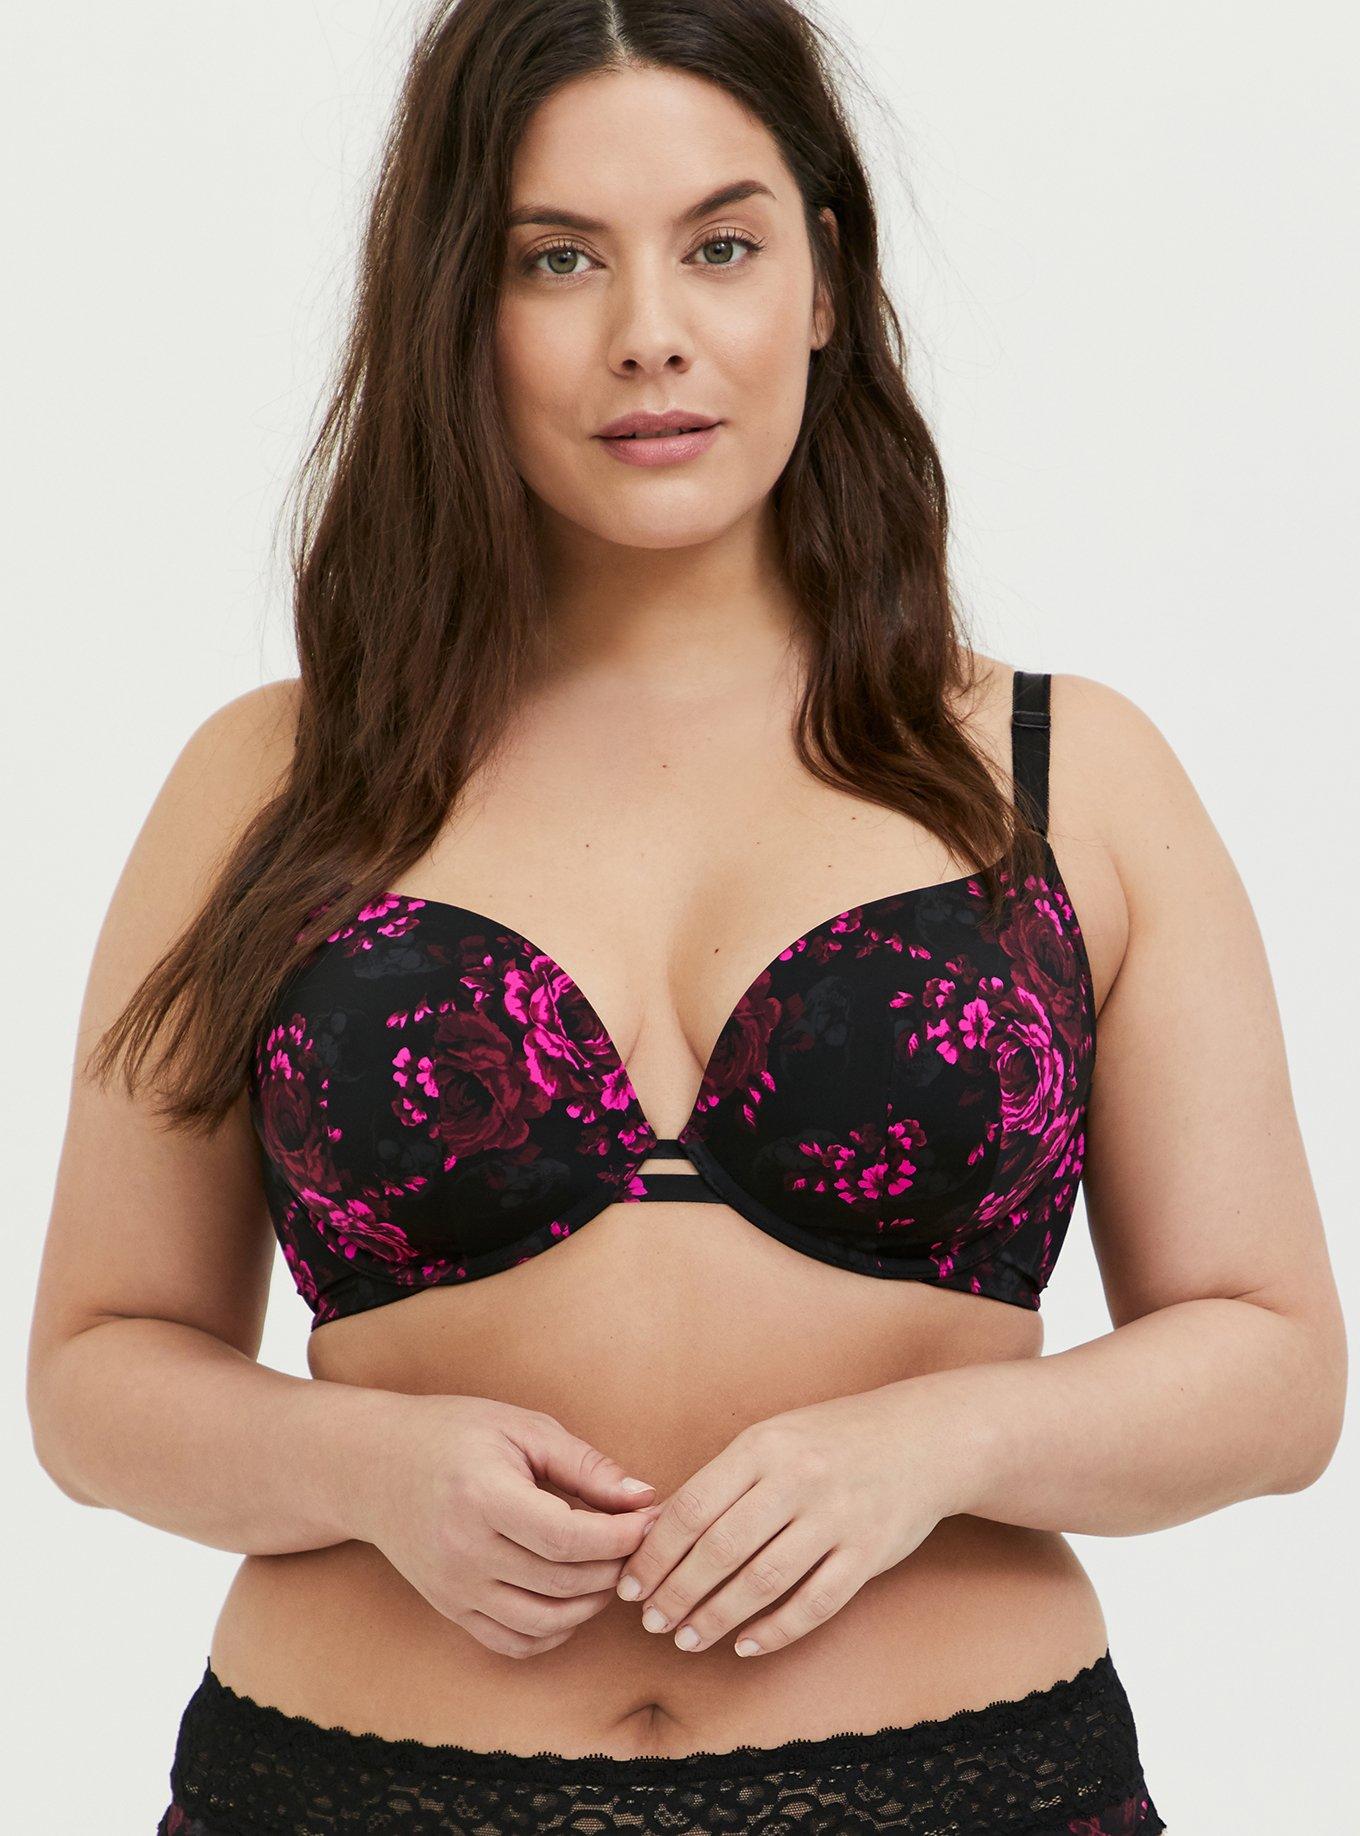 Torrid Wire-Free Plunge Lightly Lined Smooth 360° Back Smoothing Bra 46B  Size undefined - $38 New With Tags - From Stephanie